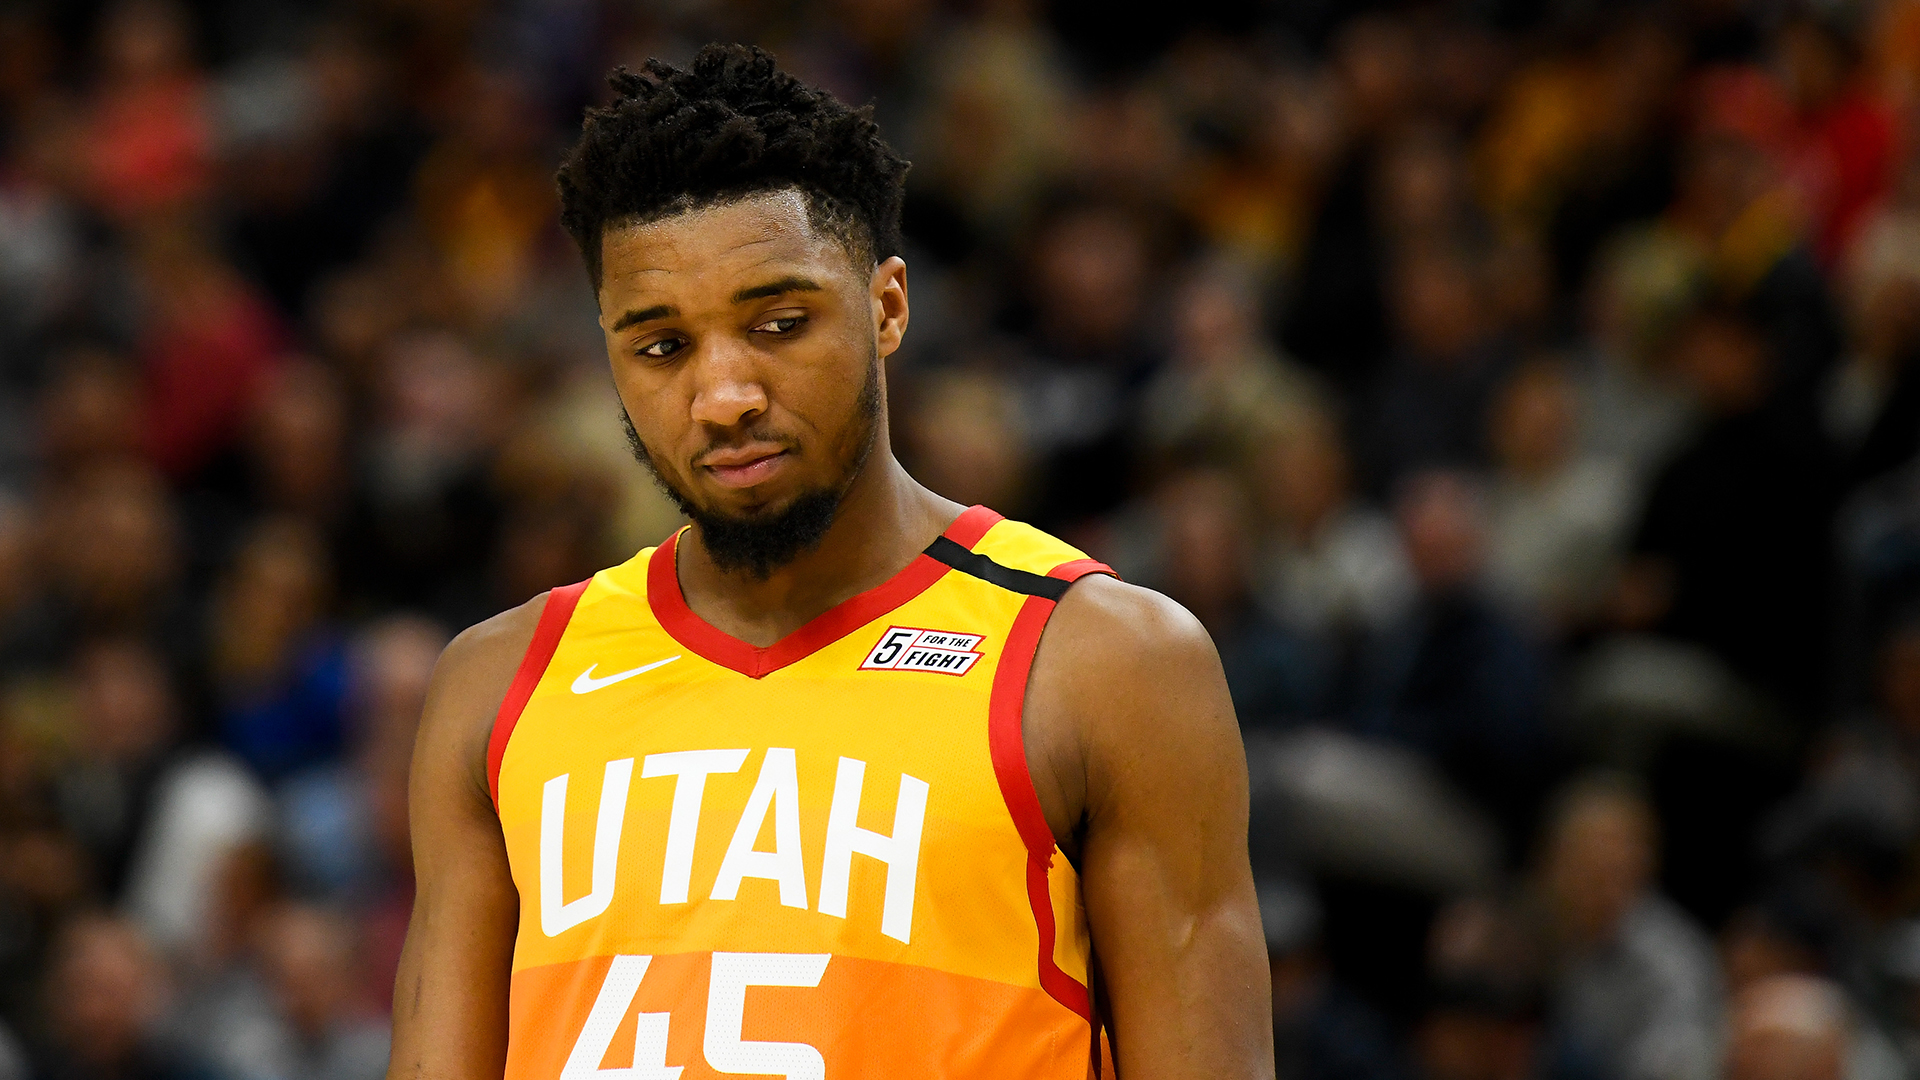 NBA Star Donovan Mitchell Said His Mom Was Racially Profiled In